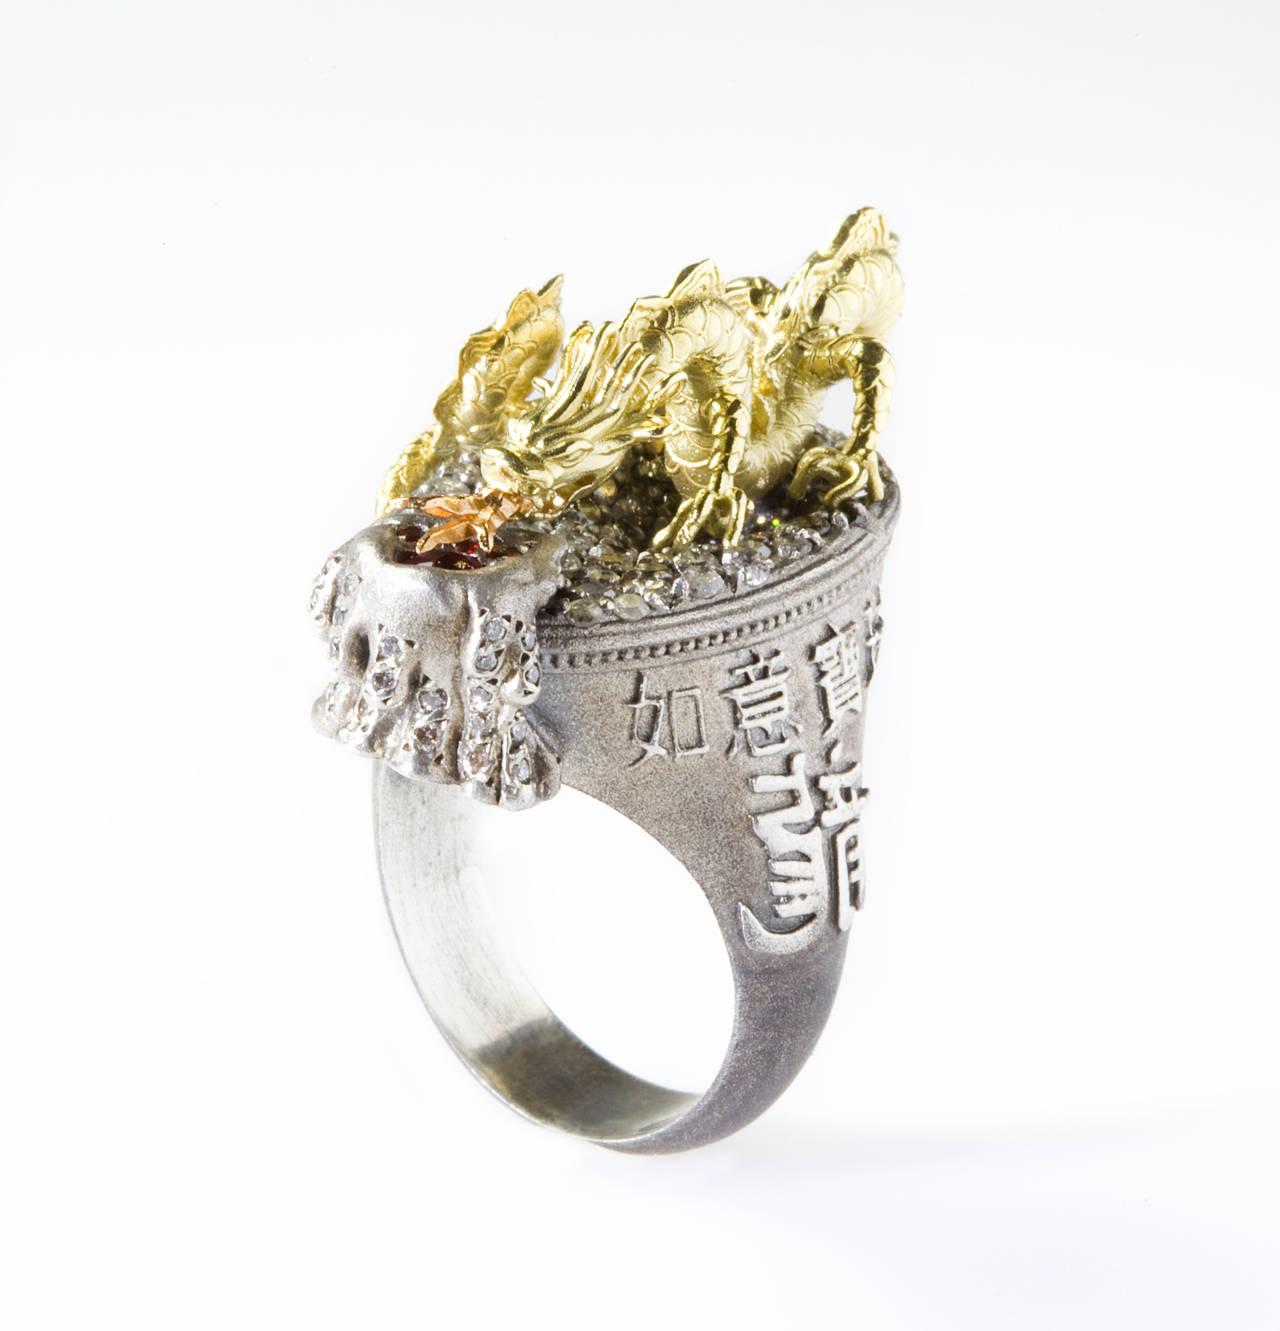 Stambolian Aged Silver 18K Gold Milky and White Diamond Dragon Ring

This ring features a Dragon with a snake's body, claws of an eagle, pigs nose, rabbits eyes, head of a camel, scales of the carp, deer horns, bull ears, tiger paws, a clams